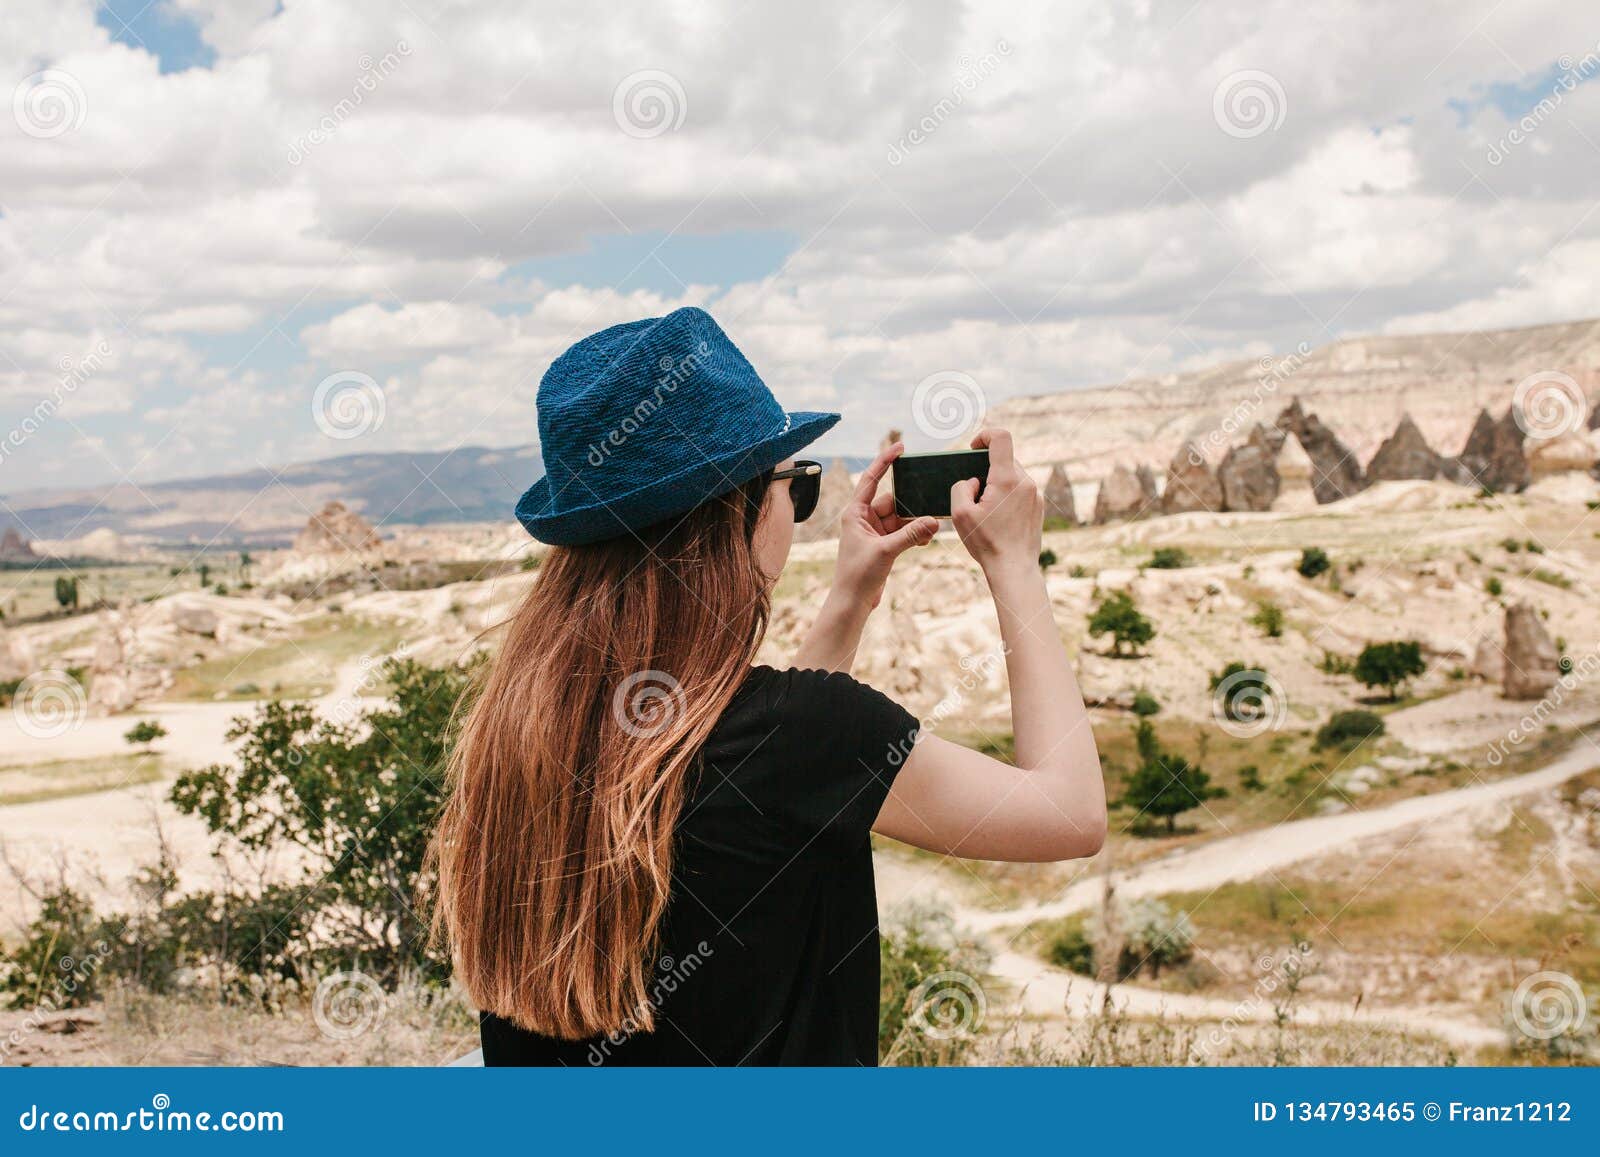 a tourist makes a photo on the phone in memory of a beautiful view of the hills in cappadocia in turkey. travel, tourism